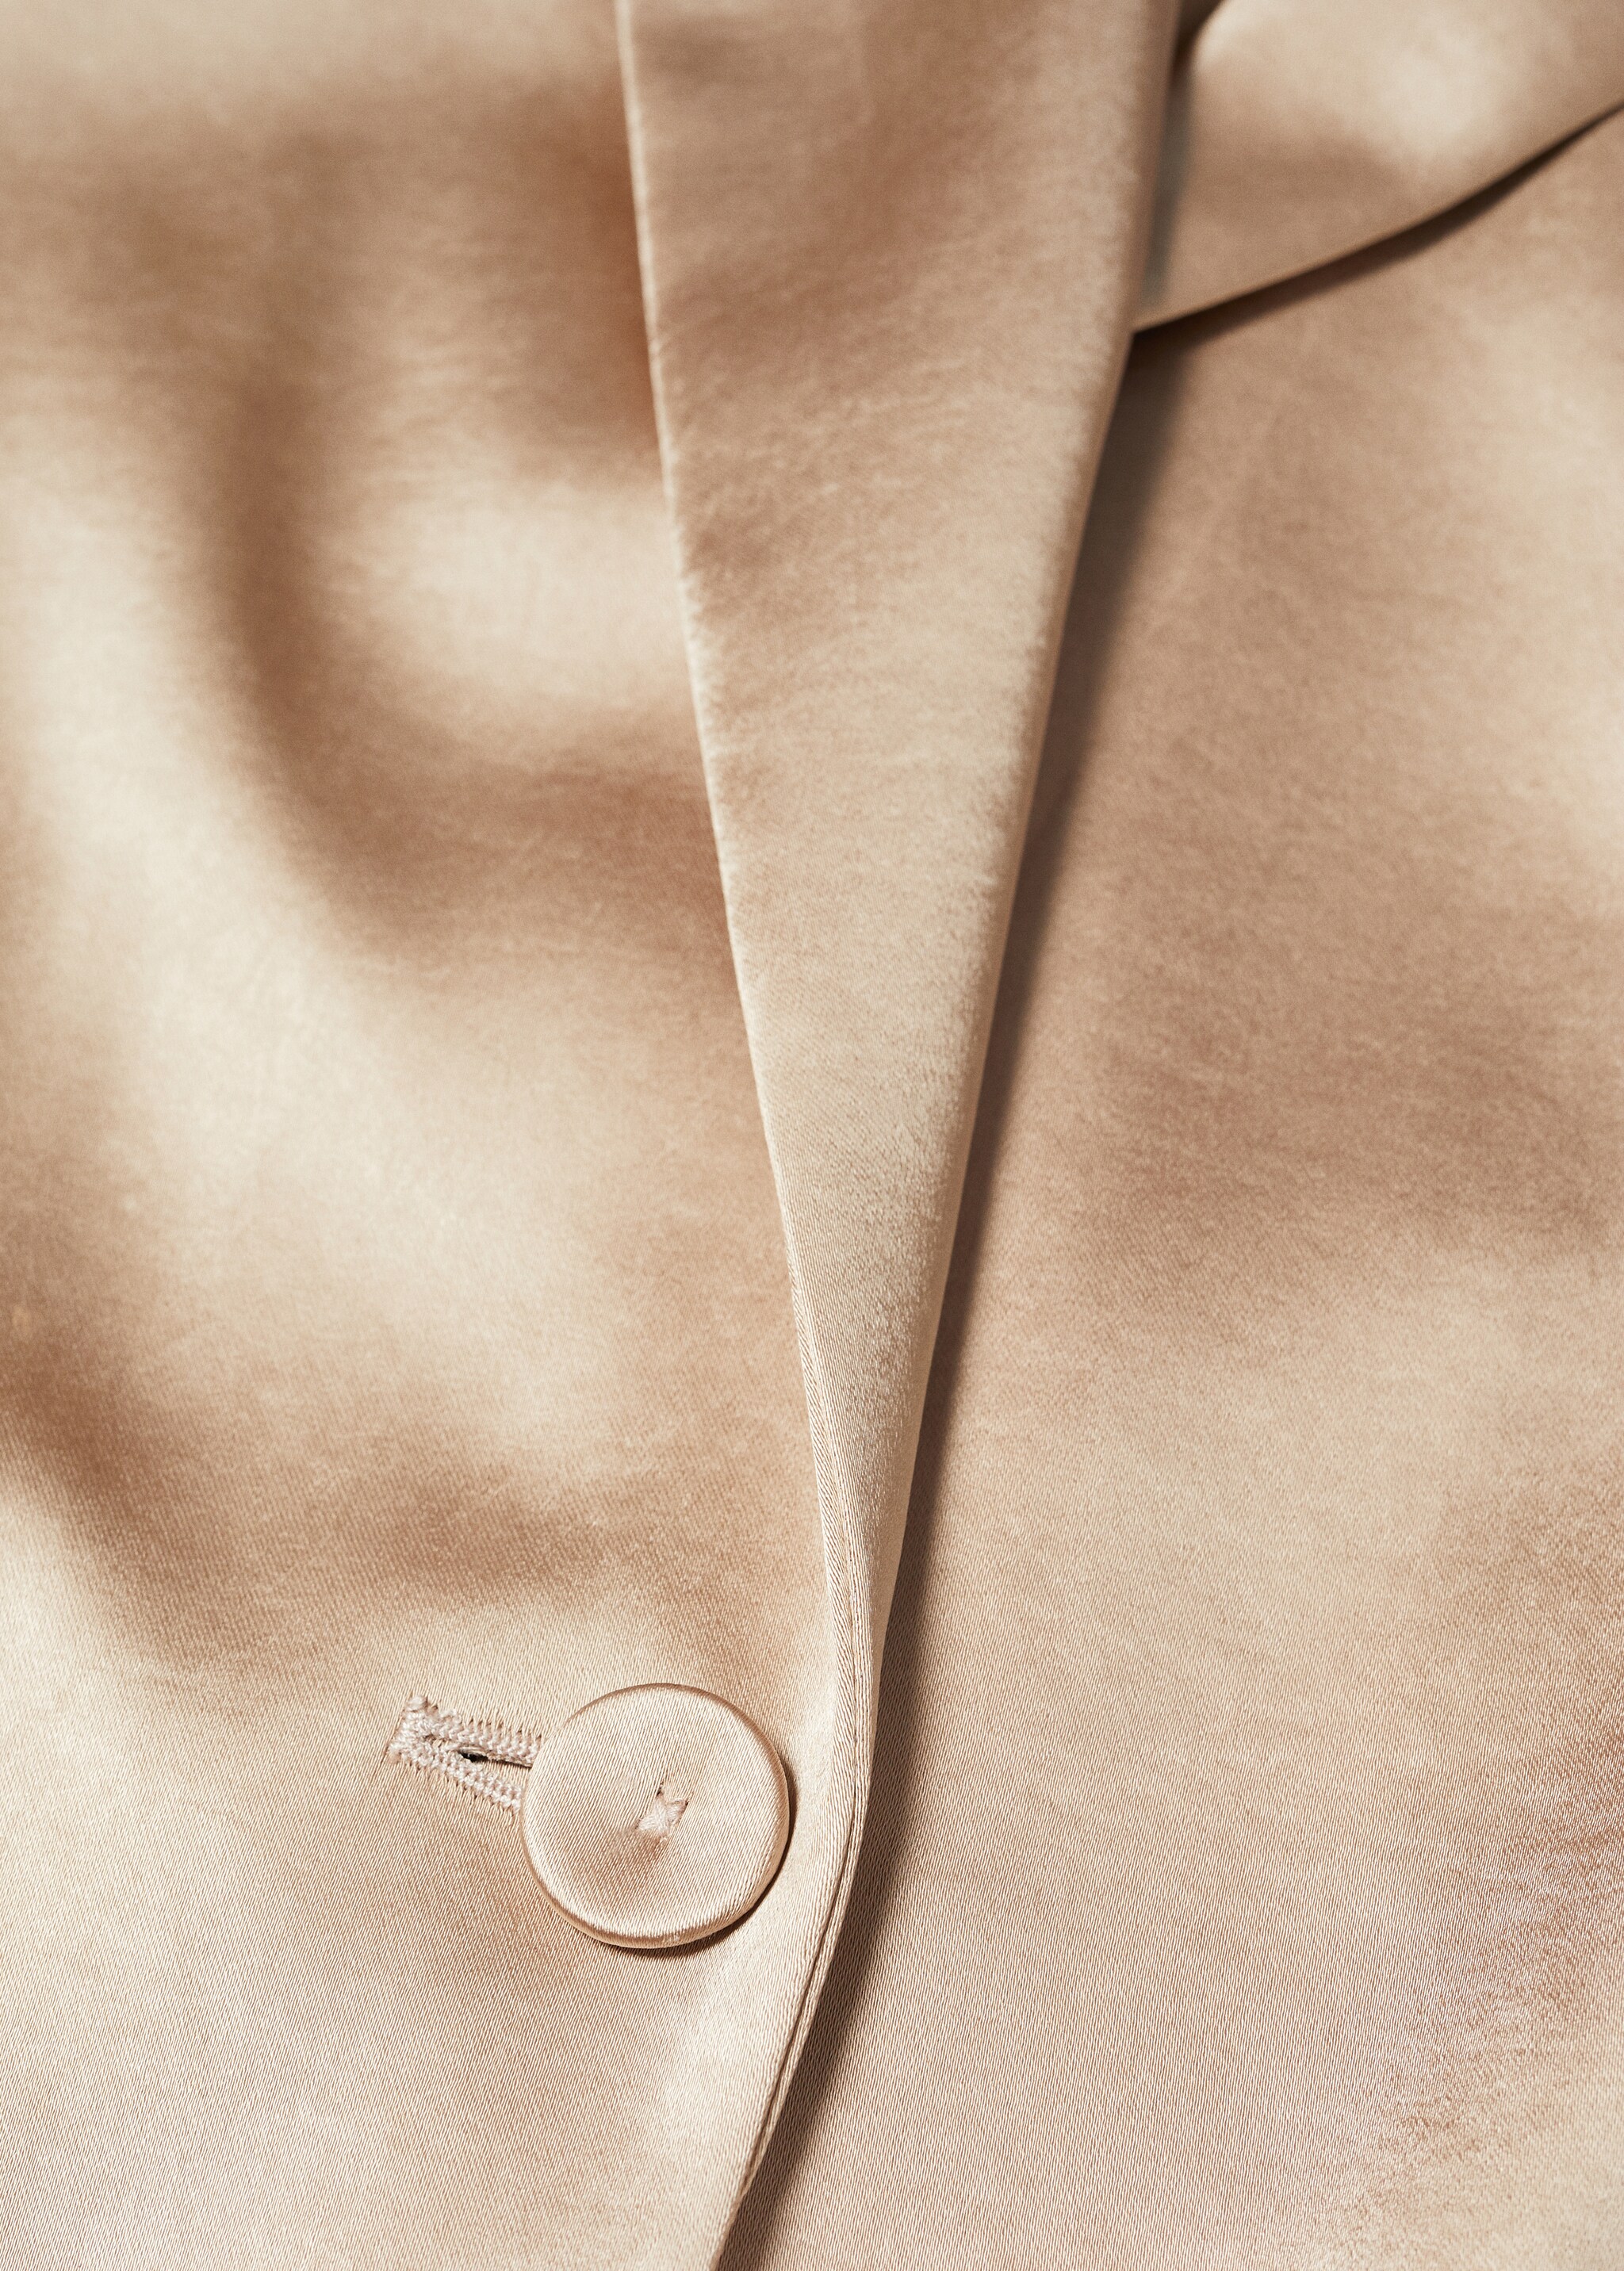 Satin-finish suit jacket - Details of the article 8